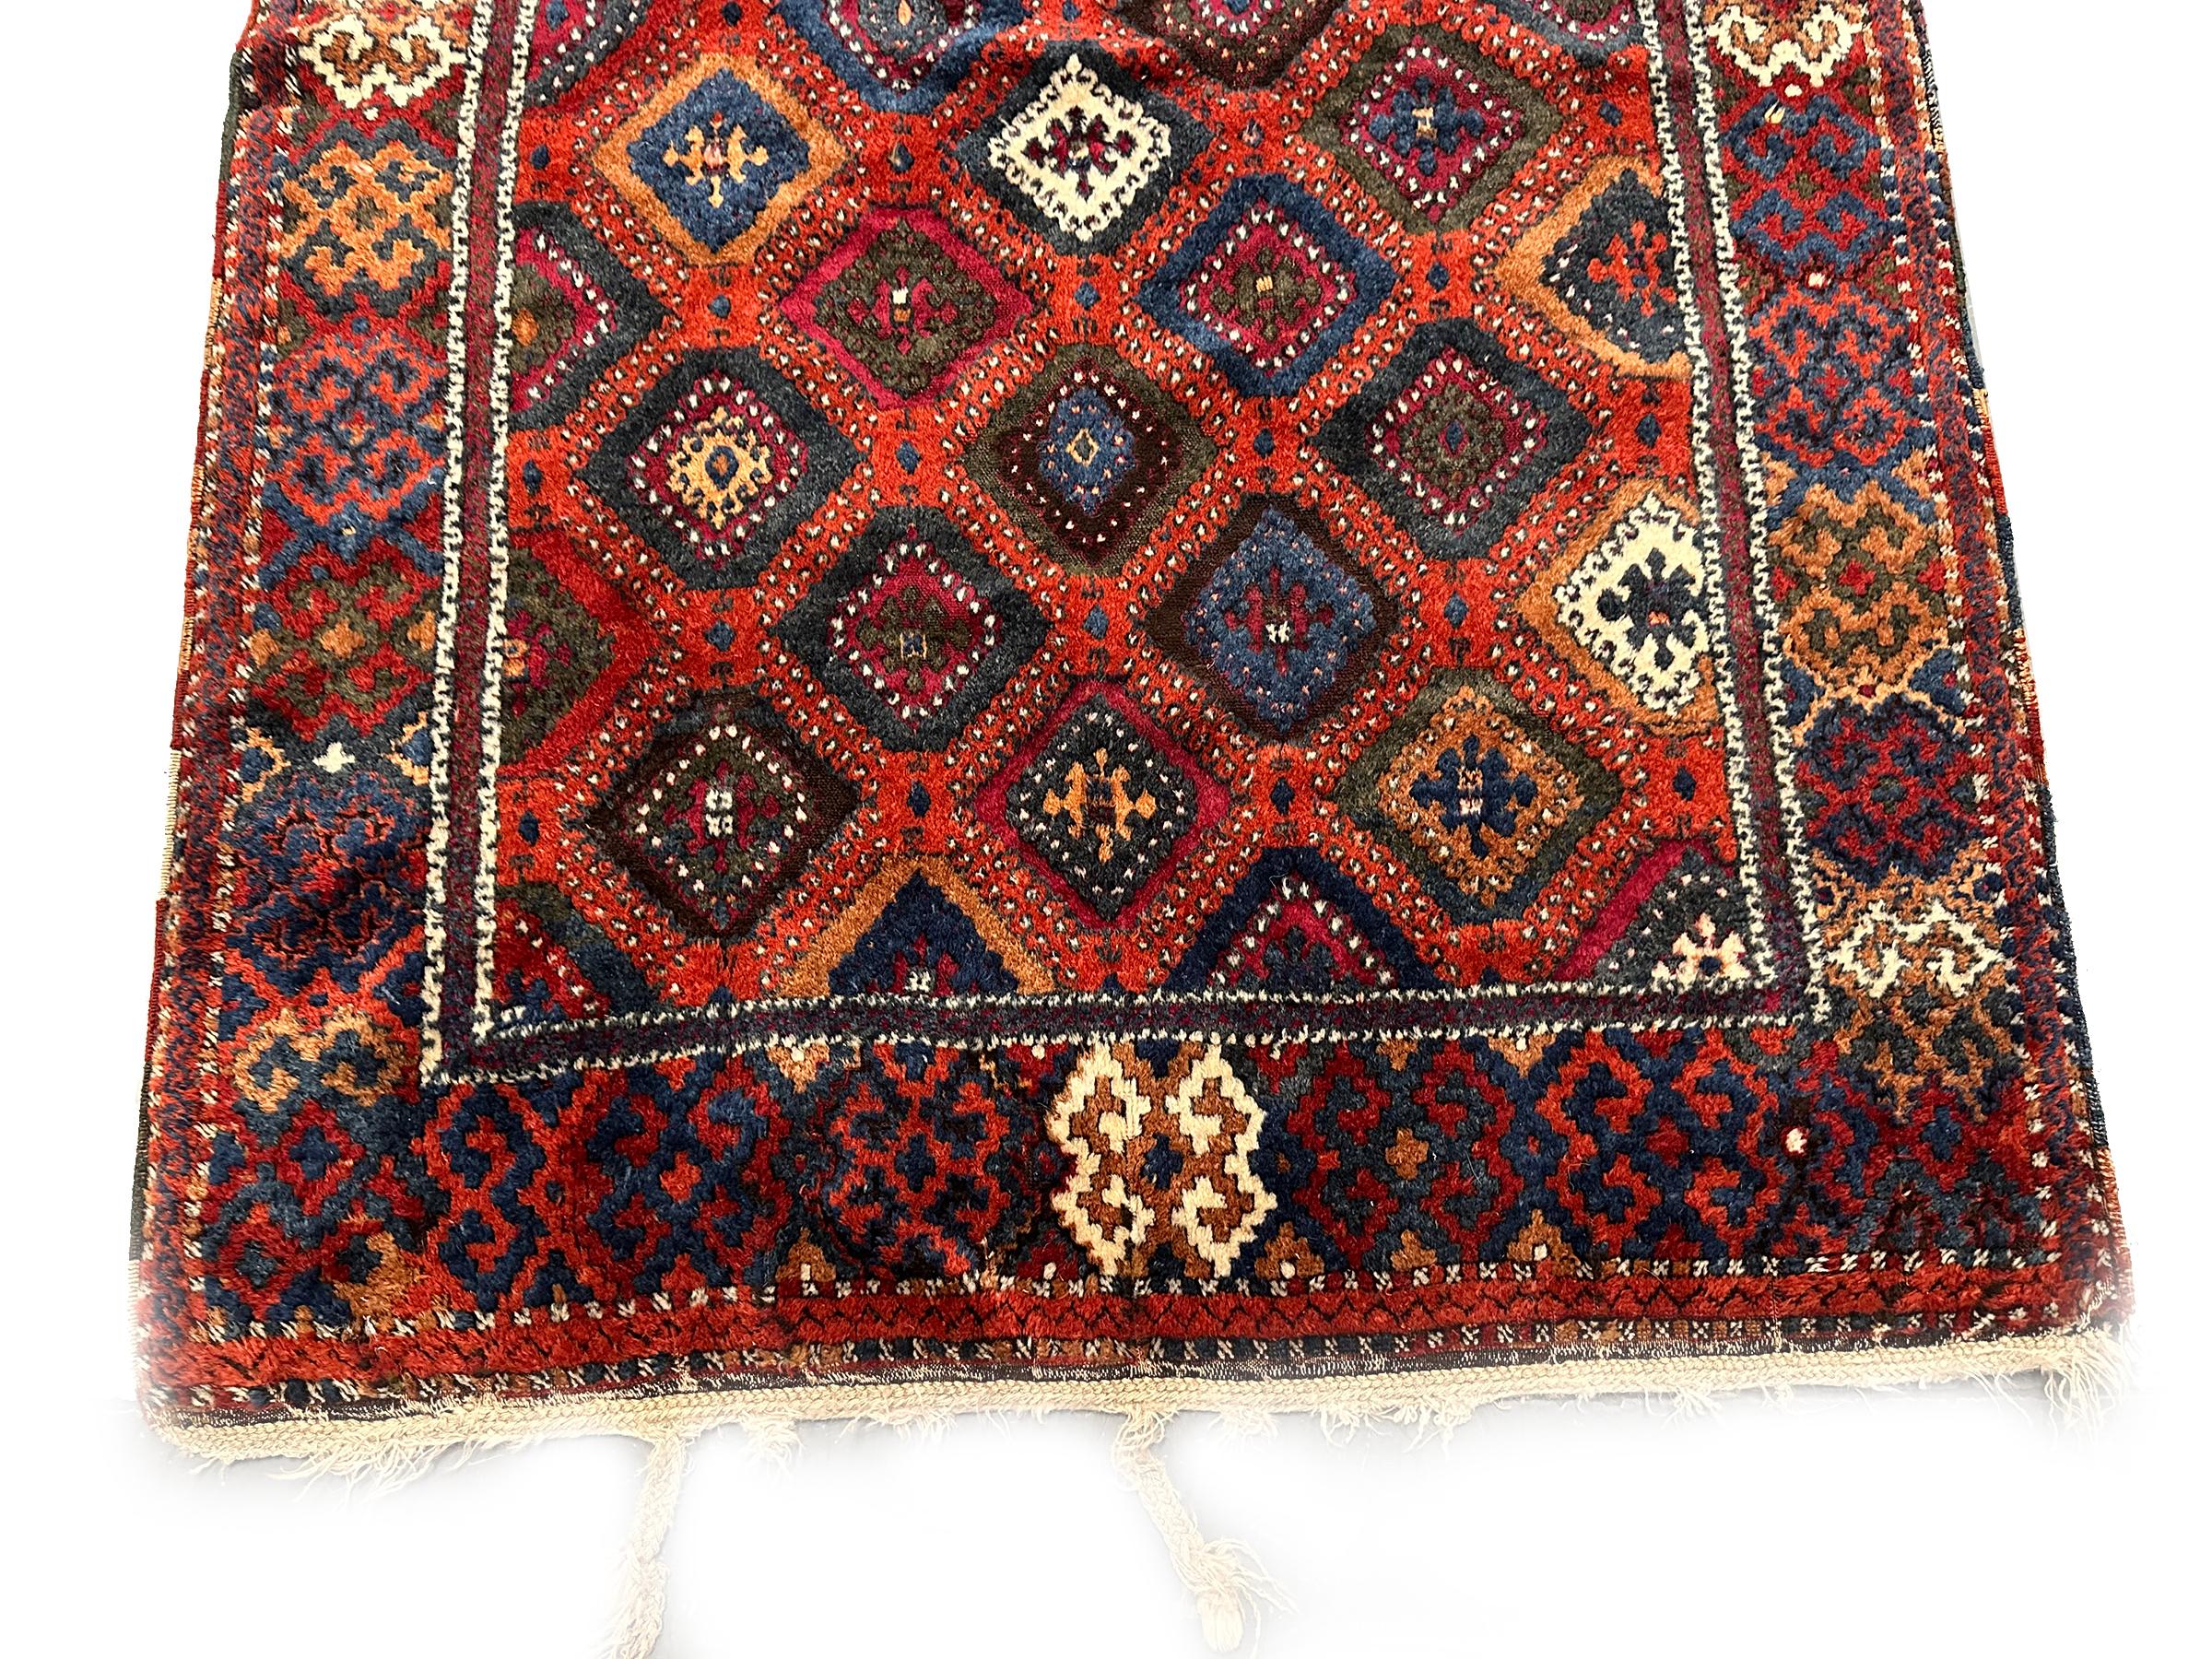 1880 Rare Antique Turkish Rug Tribal Geometric 4x6 130cm x 170cm In Good Condition For Sale In New York, NY